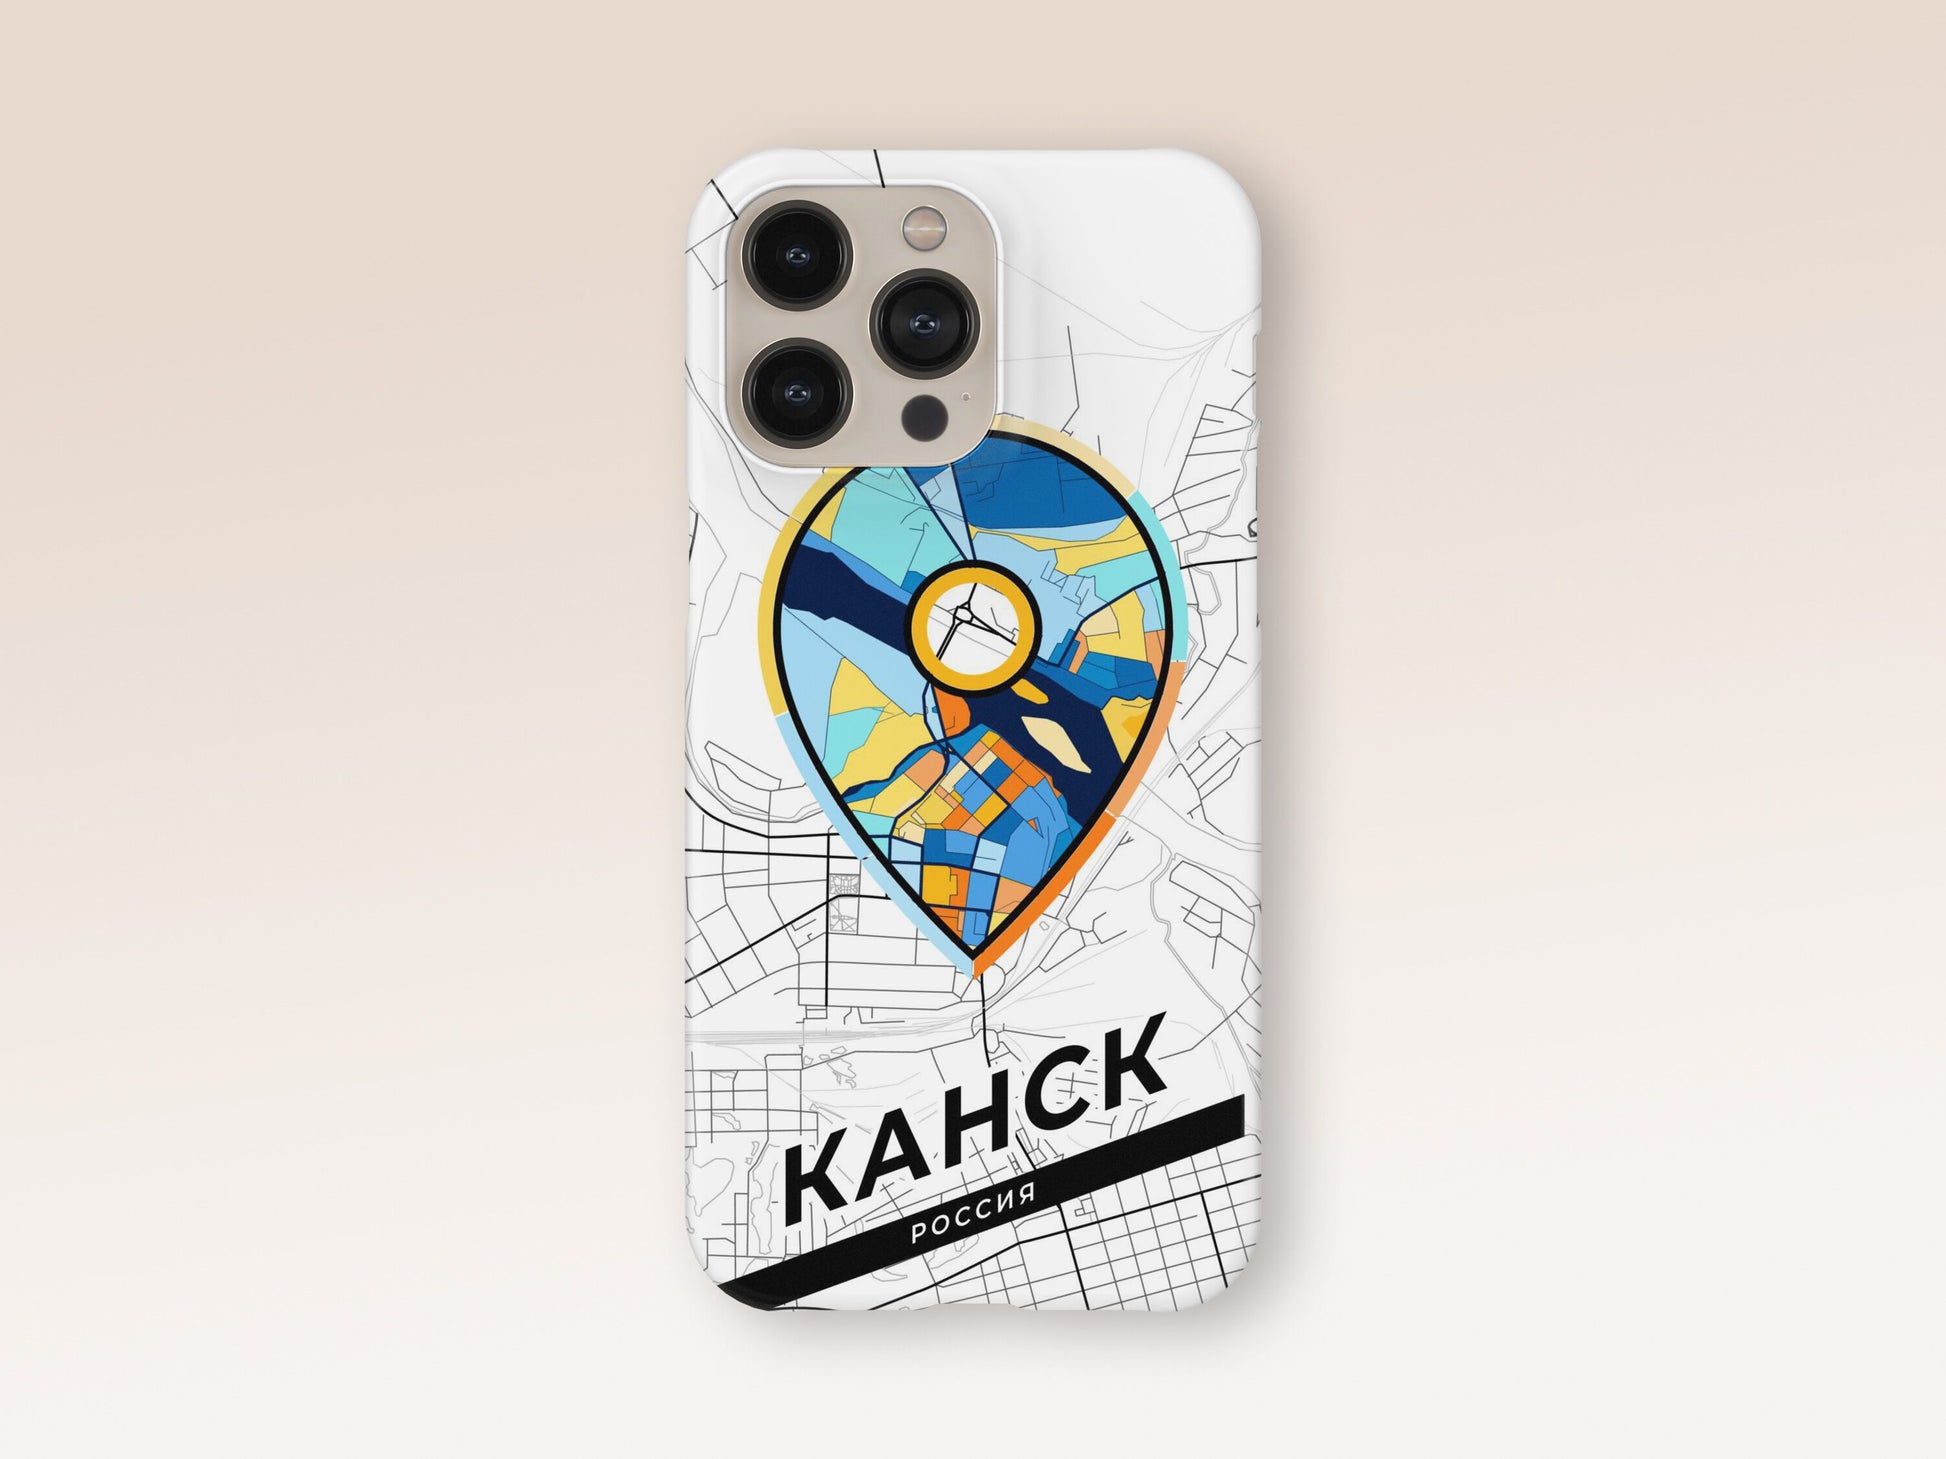 Kansk Russia slim phone case with colorful icon. Birthday, wedding or housewarming gift. Couple match cases. 1